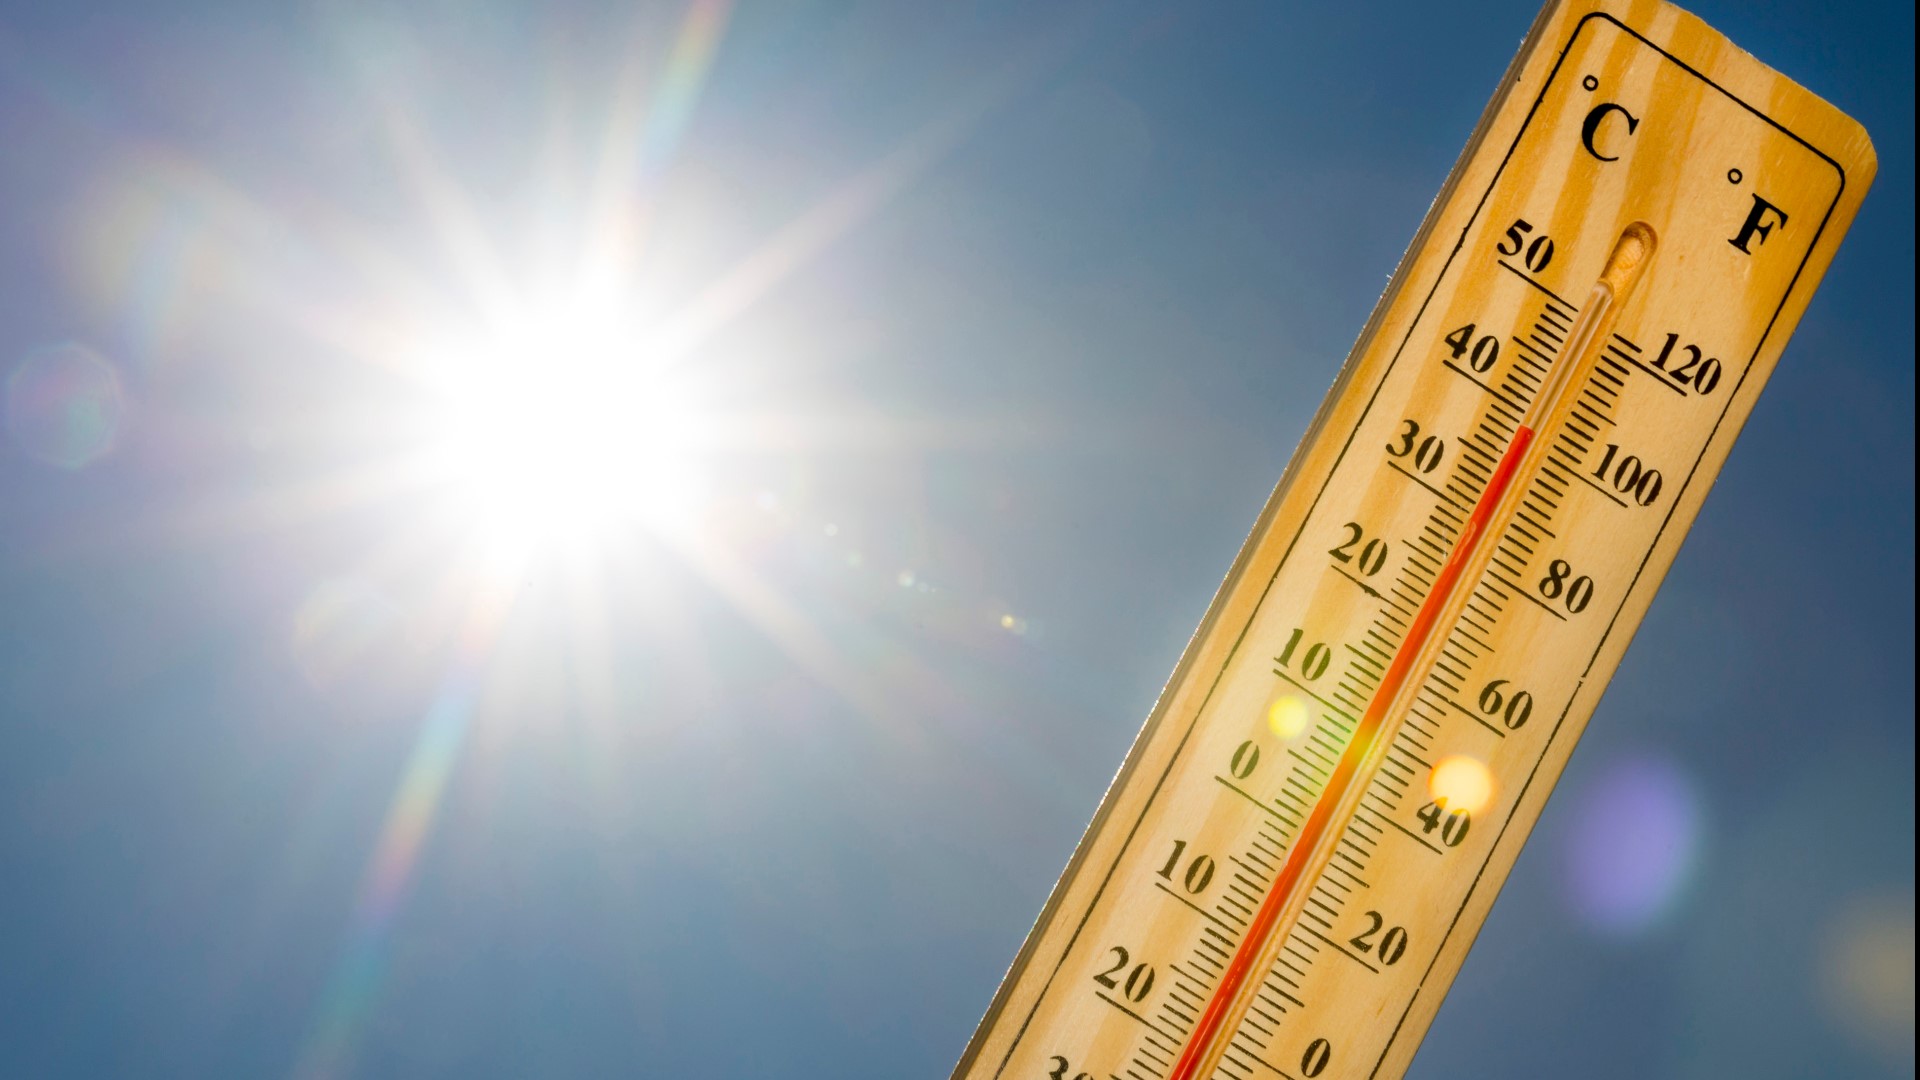 882 Iowans were hospitalized due to heat exposure in 2020.